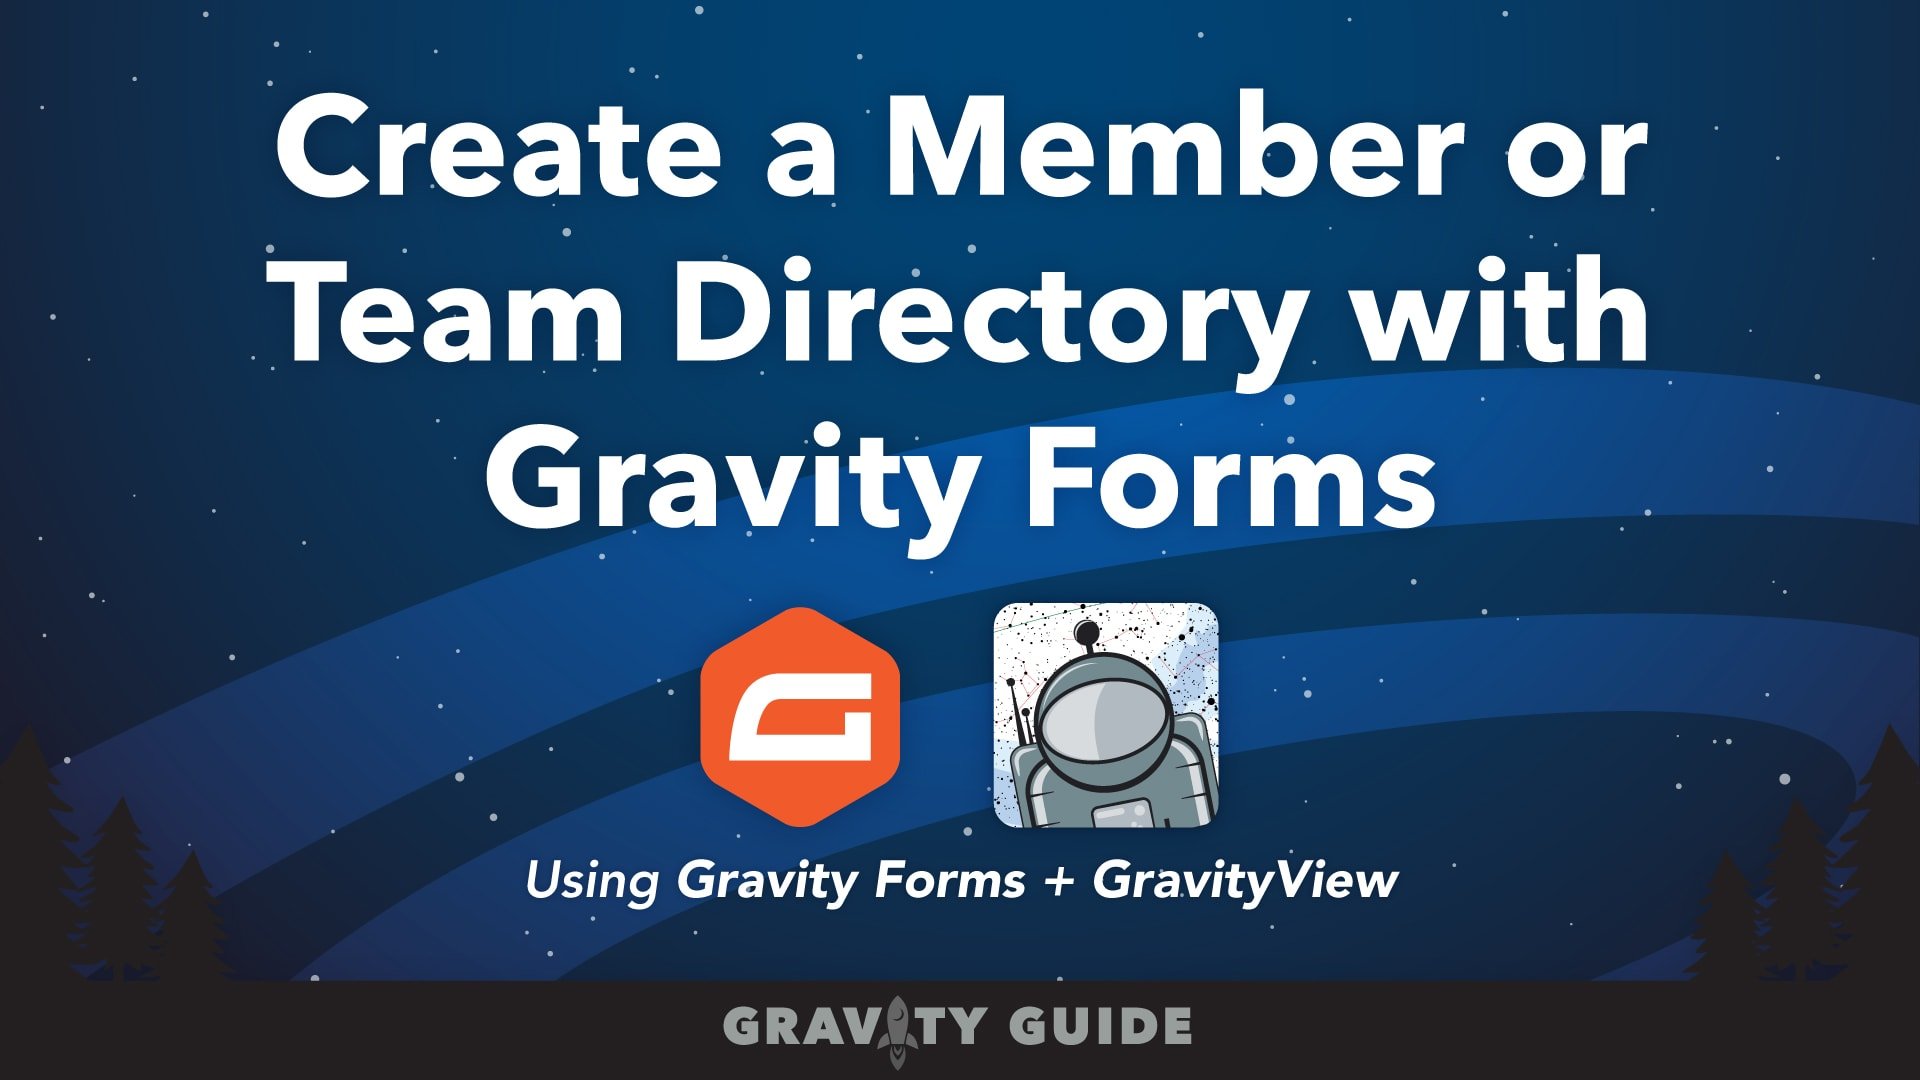 Create a Member or Team Member Directory with Gravity Forms